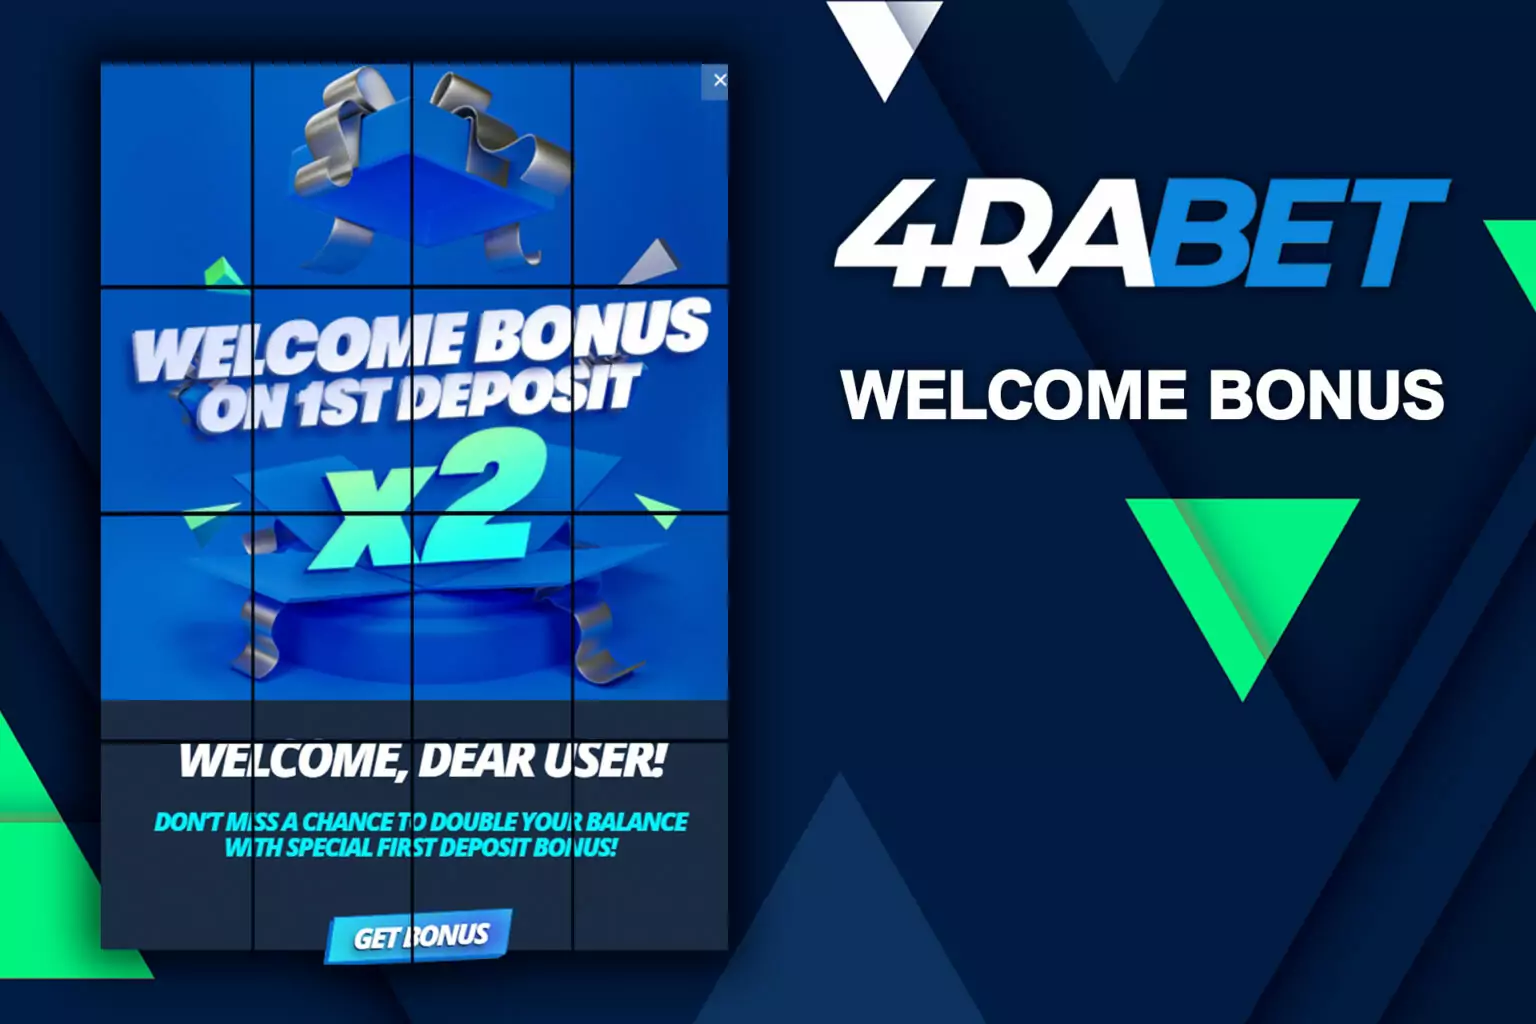 4rabet Bonuses and Promotions in India up to INR 26,000